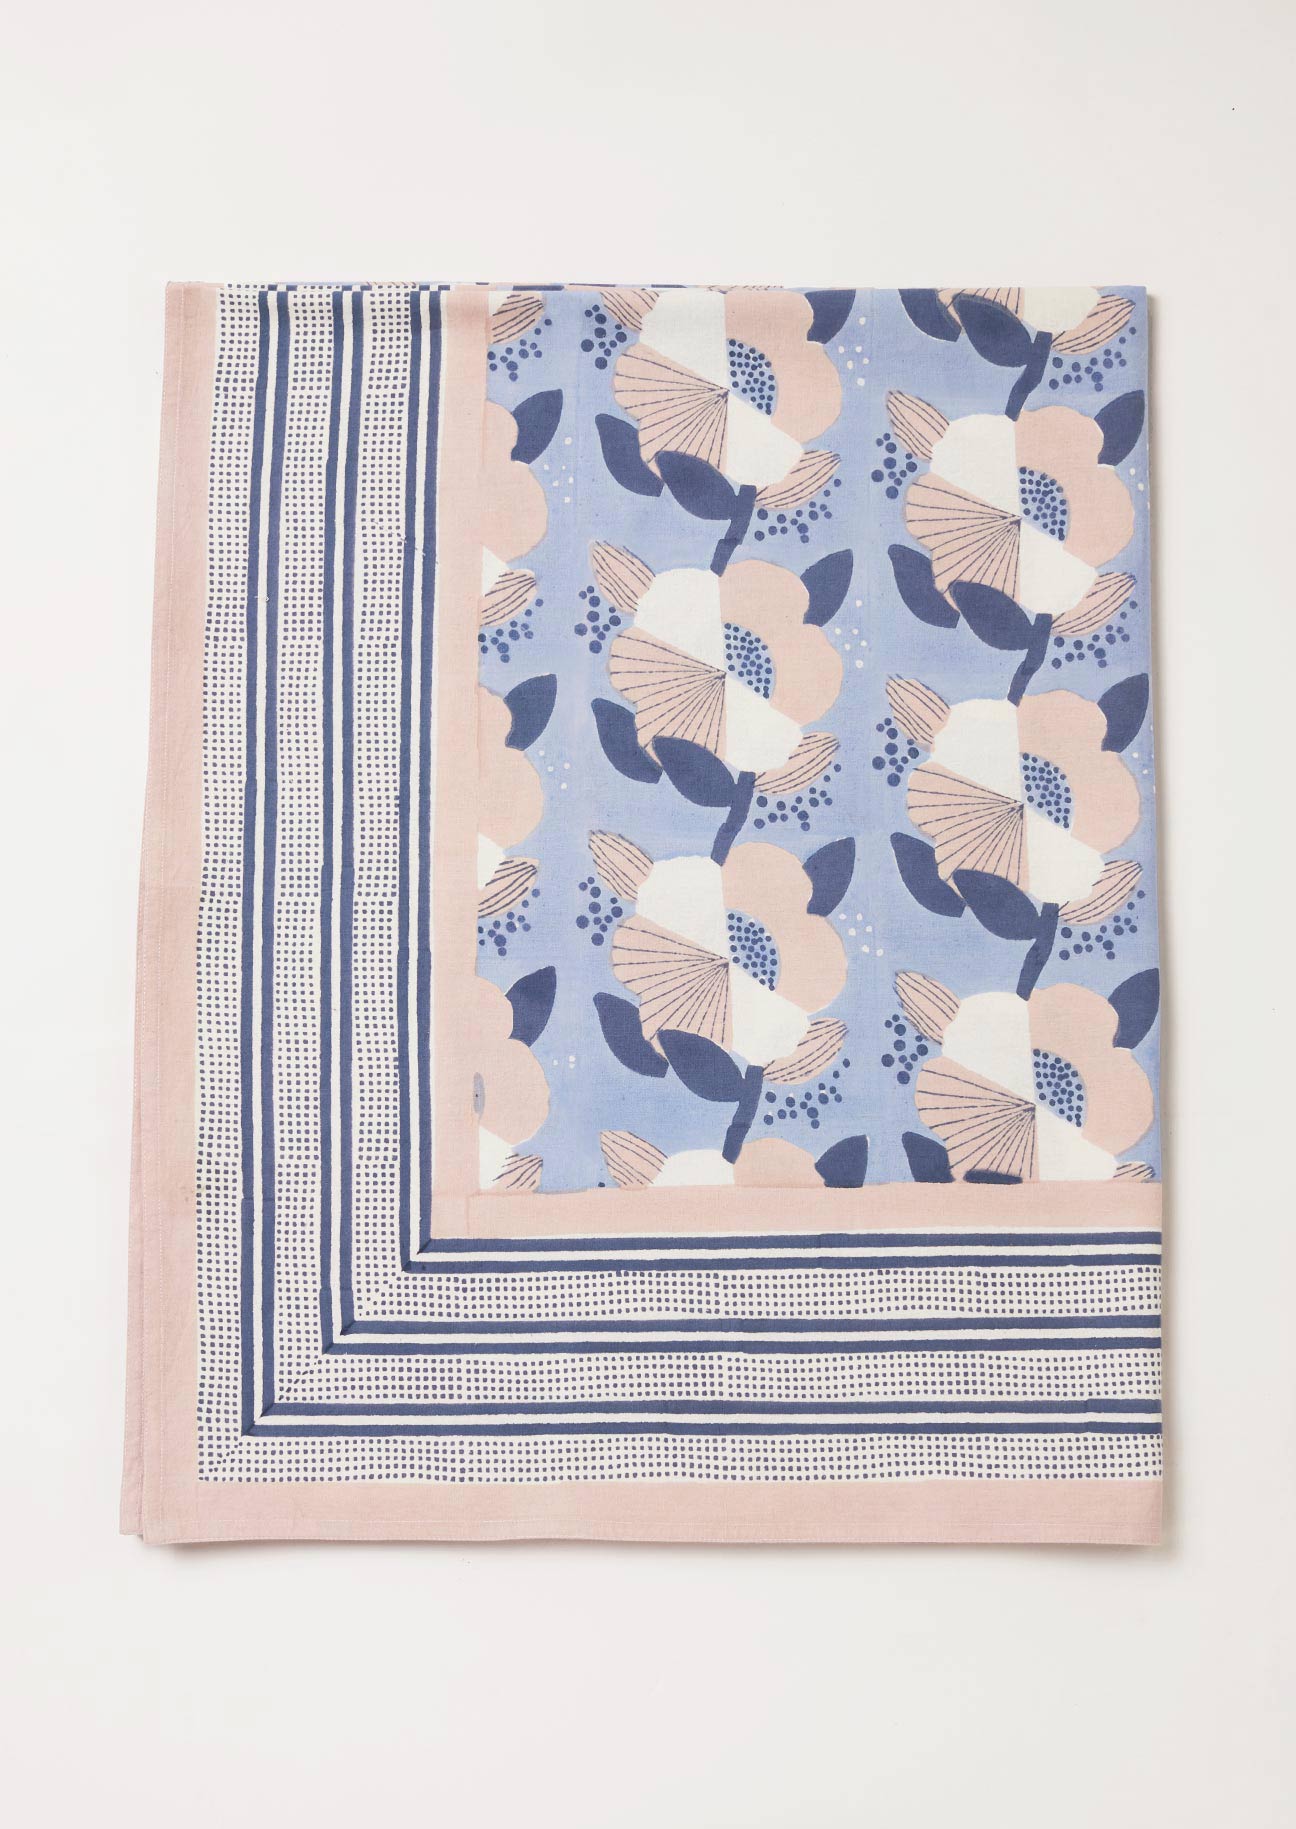 Detail of blue, navy and pink handmade floral tablecloth with stripe border design.